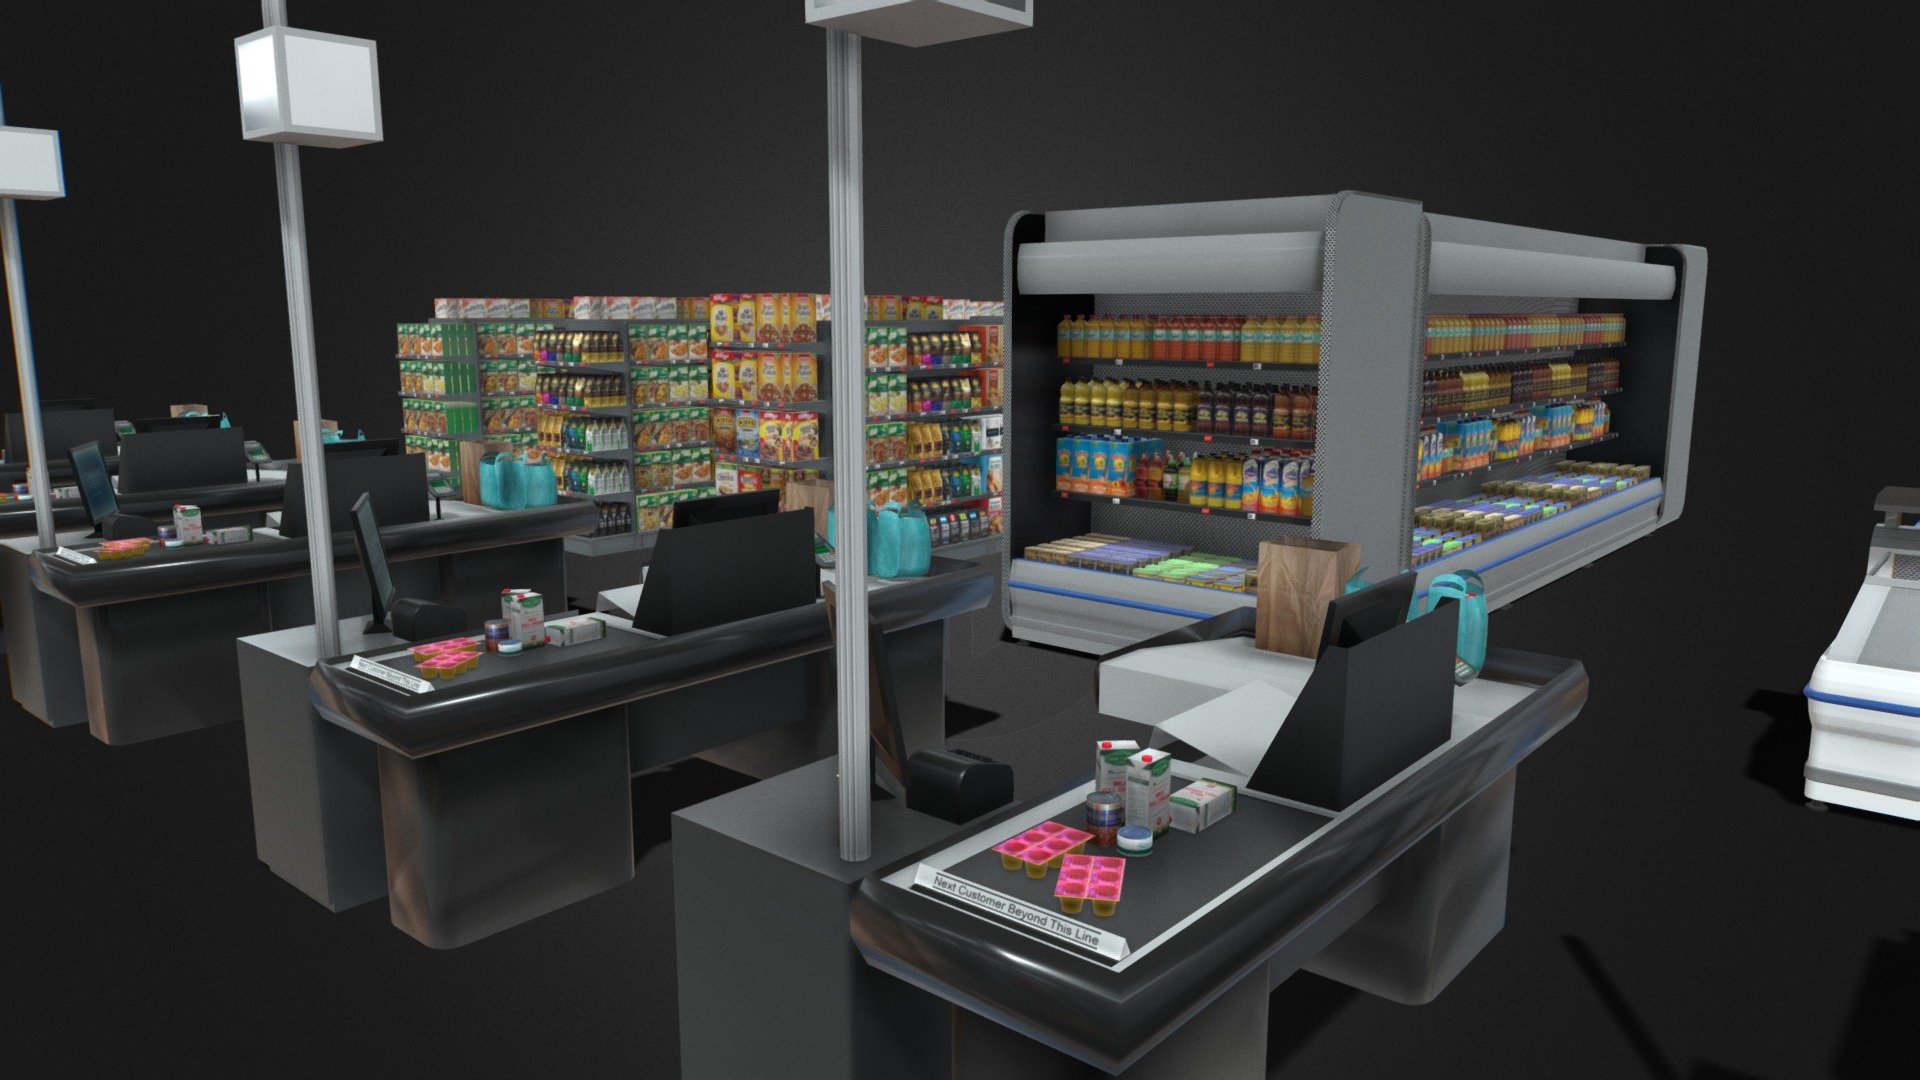 Supermarket shelves checkout fridges freezers

Shop Aisle or shelving Shelf with coffee Shelf with Cereal - 1 Shelf with Cereal - 2 Shelf with rusks / Biscotty Shelf with boxed pasta and sauce / ready meal

Checkout or till point cash desk Checkout desk Till point Card machine

Standing fridge The model consists of 4 notable pieces of 3d mesh when opened: Individual elements - can be used to assemble a custom scene to your liking. I recommend just using array to nake up the length, then sape cthe end caps to finalize the model to your length A pre built wall fridge configuration A pre built Ailse frige or refrigirated area A single fridge configuration The strore grocery products on shelf in the open freezer is as follows: Product Included: Bottles: Juiced, Clover Duo Krush Orange, Red Grape, Guava, Mango, Clover Tropika, Mango peach, Tropical, Pineapple Henties, Guava, Orange, Butters and spread, margarine Rama, Stork, Sunshine D Ole, - Supermarket shelves checkout fridges freezers - Buy Royalty Free 3D model by 3D Content Online (@hknoblauch) 3d model